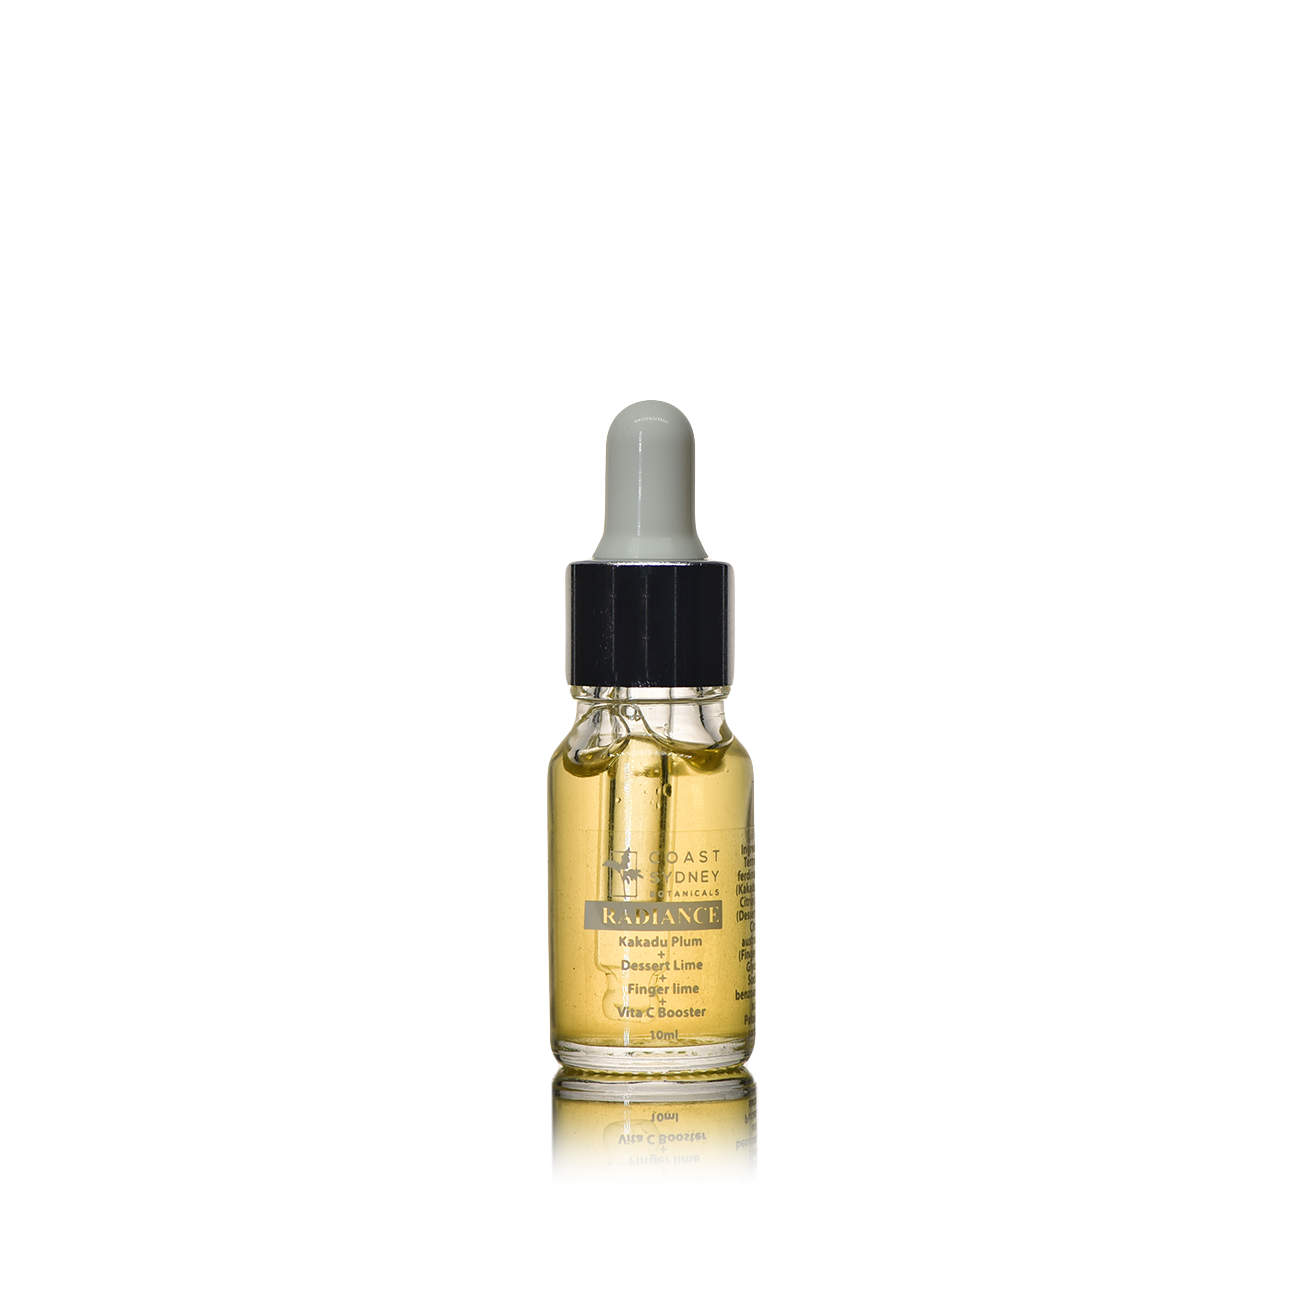 A light yellow face serum in a dropper bottle named 'Radiance'.'